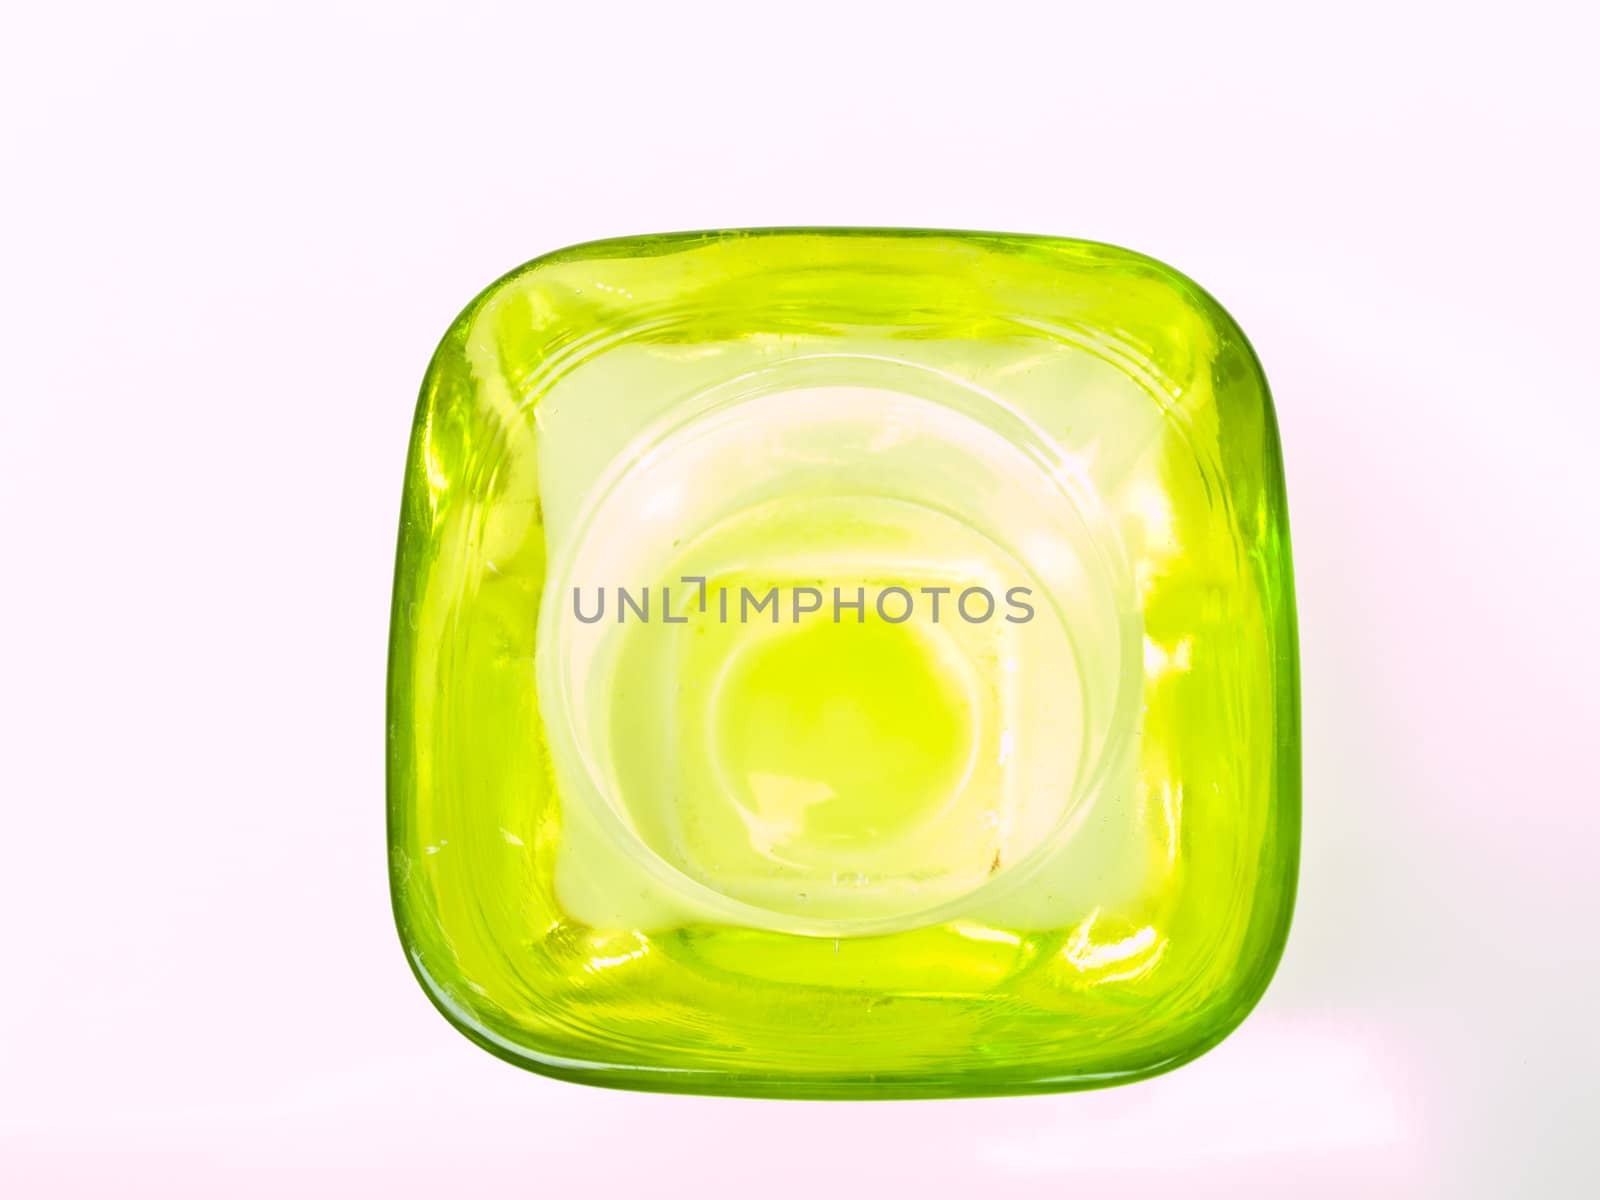 A green glass candle handle